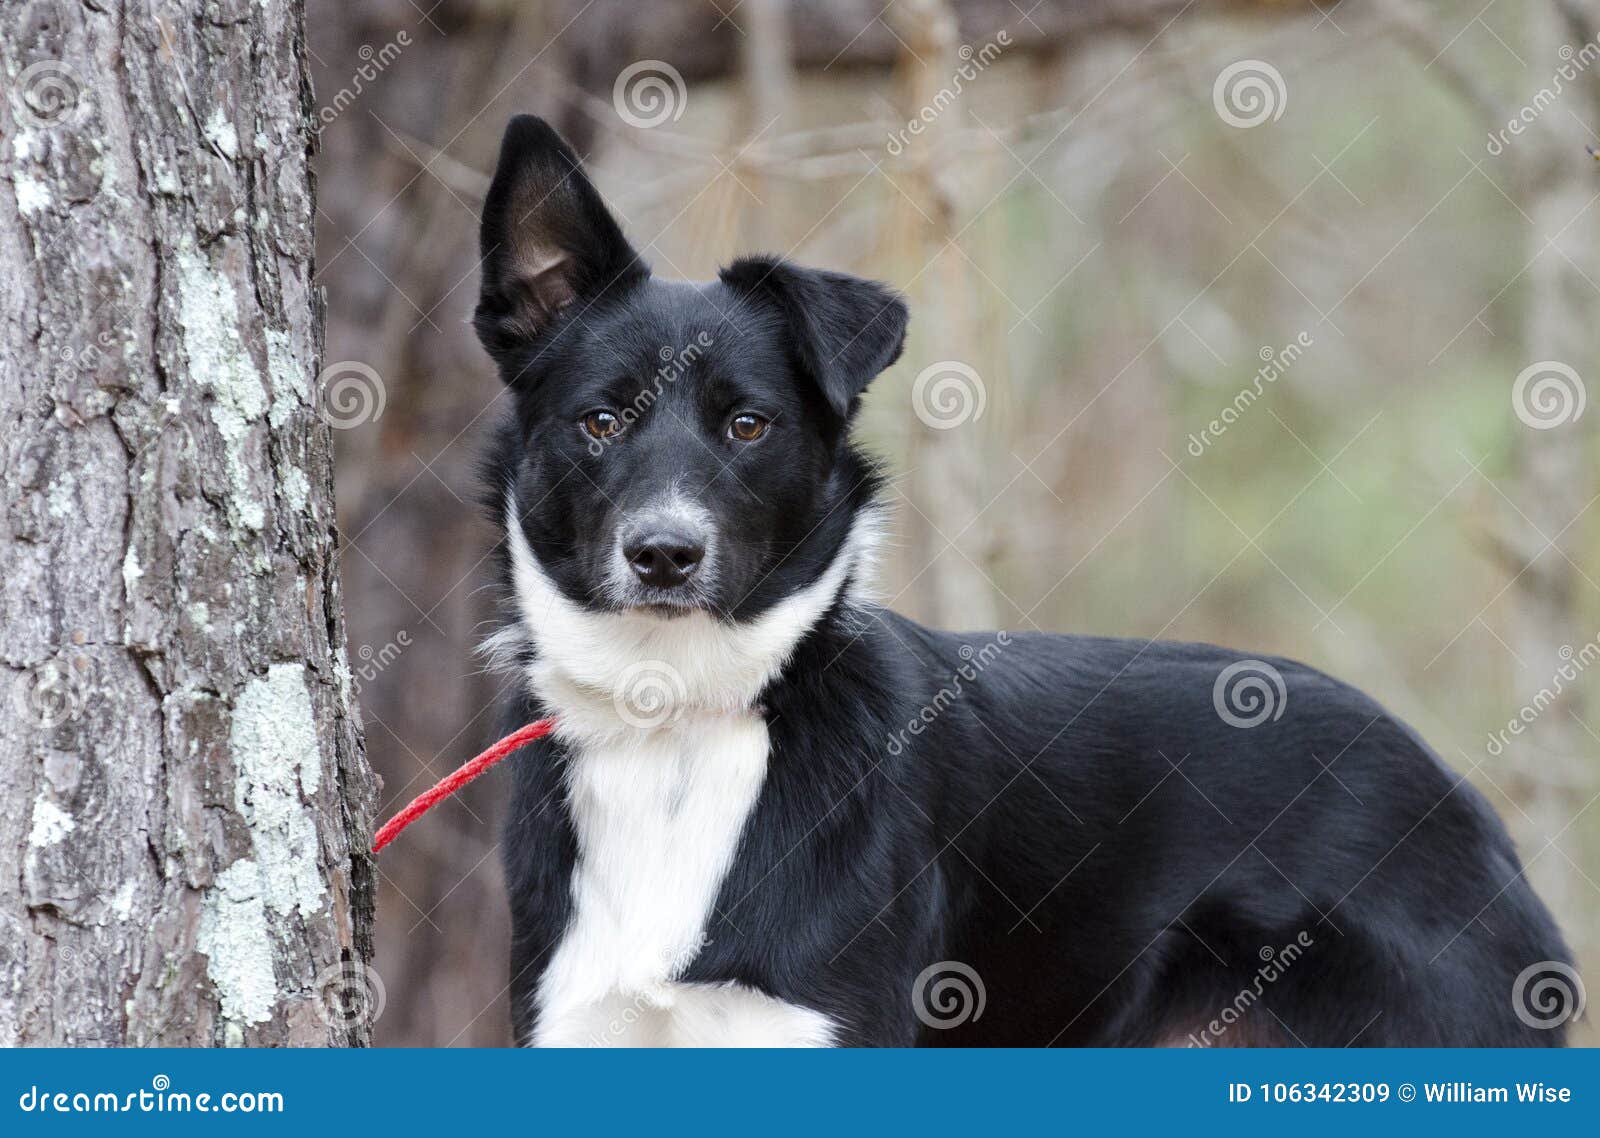 Black And White Border Collie Aussie Mixed Breed Dog Stock Image Image Of Adoptions Mutt 106342309